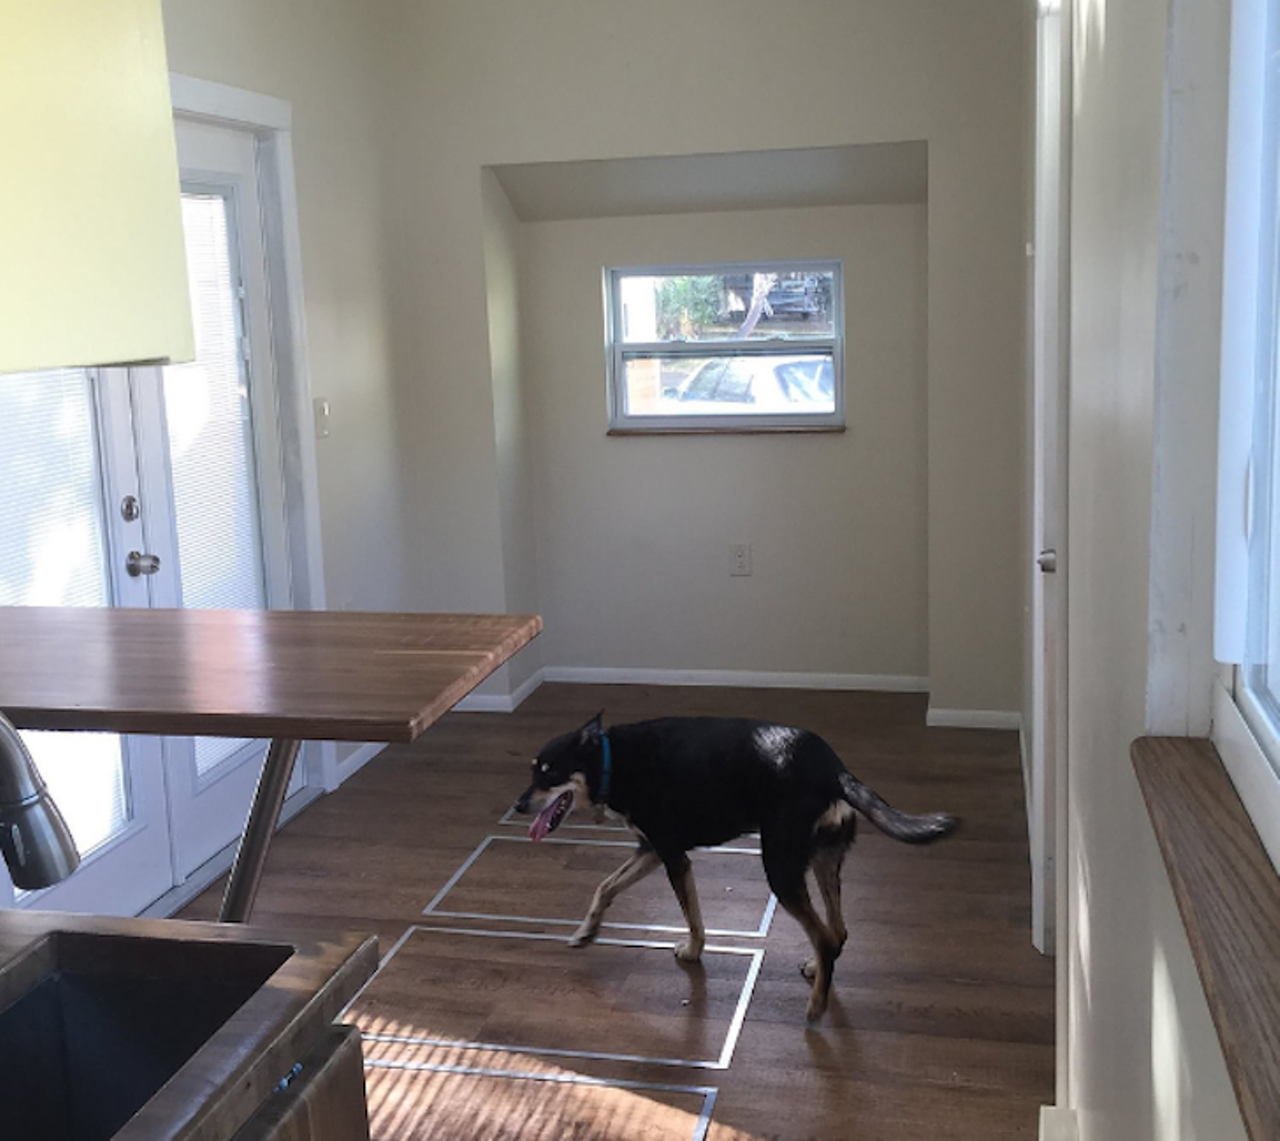 Little Sunshine
Location: Leesburg
Price: $59,000
Size: 225 sq. ft.
A great living room area surrounded by natural light filtering in from windows. It's just asking for game nights, wine nights or playing with your pup times ... although this adorable pup is not included. 